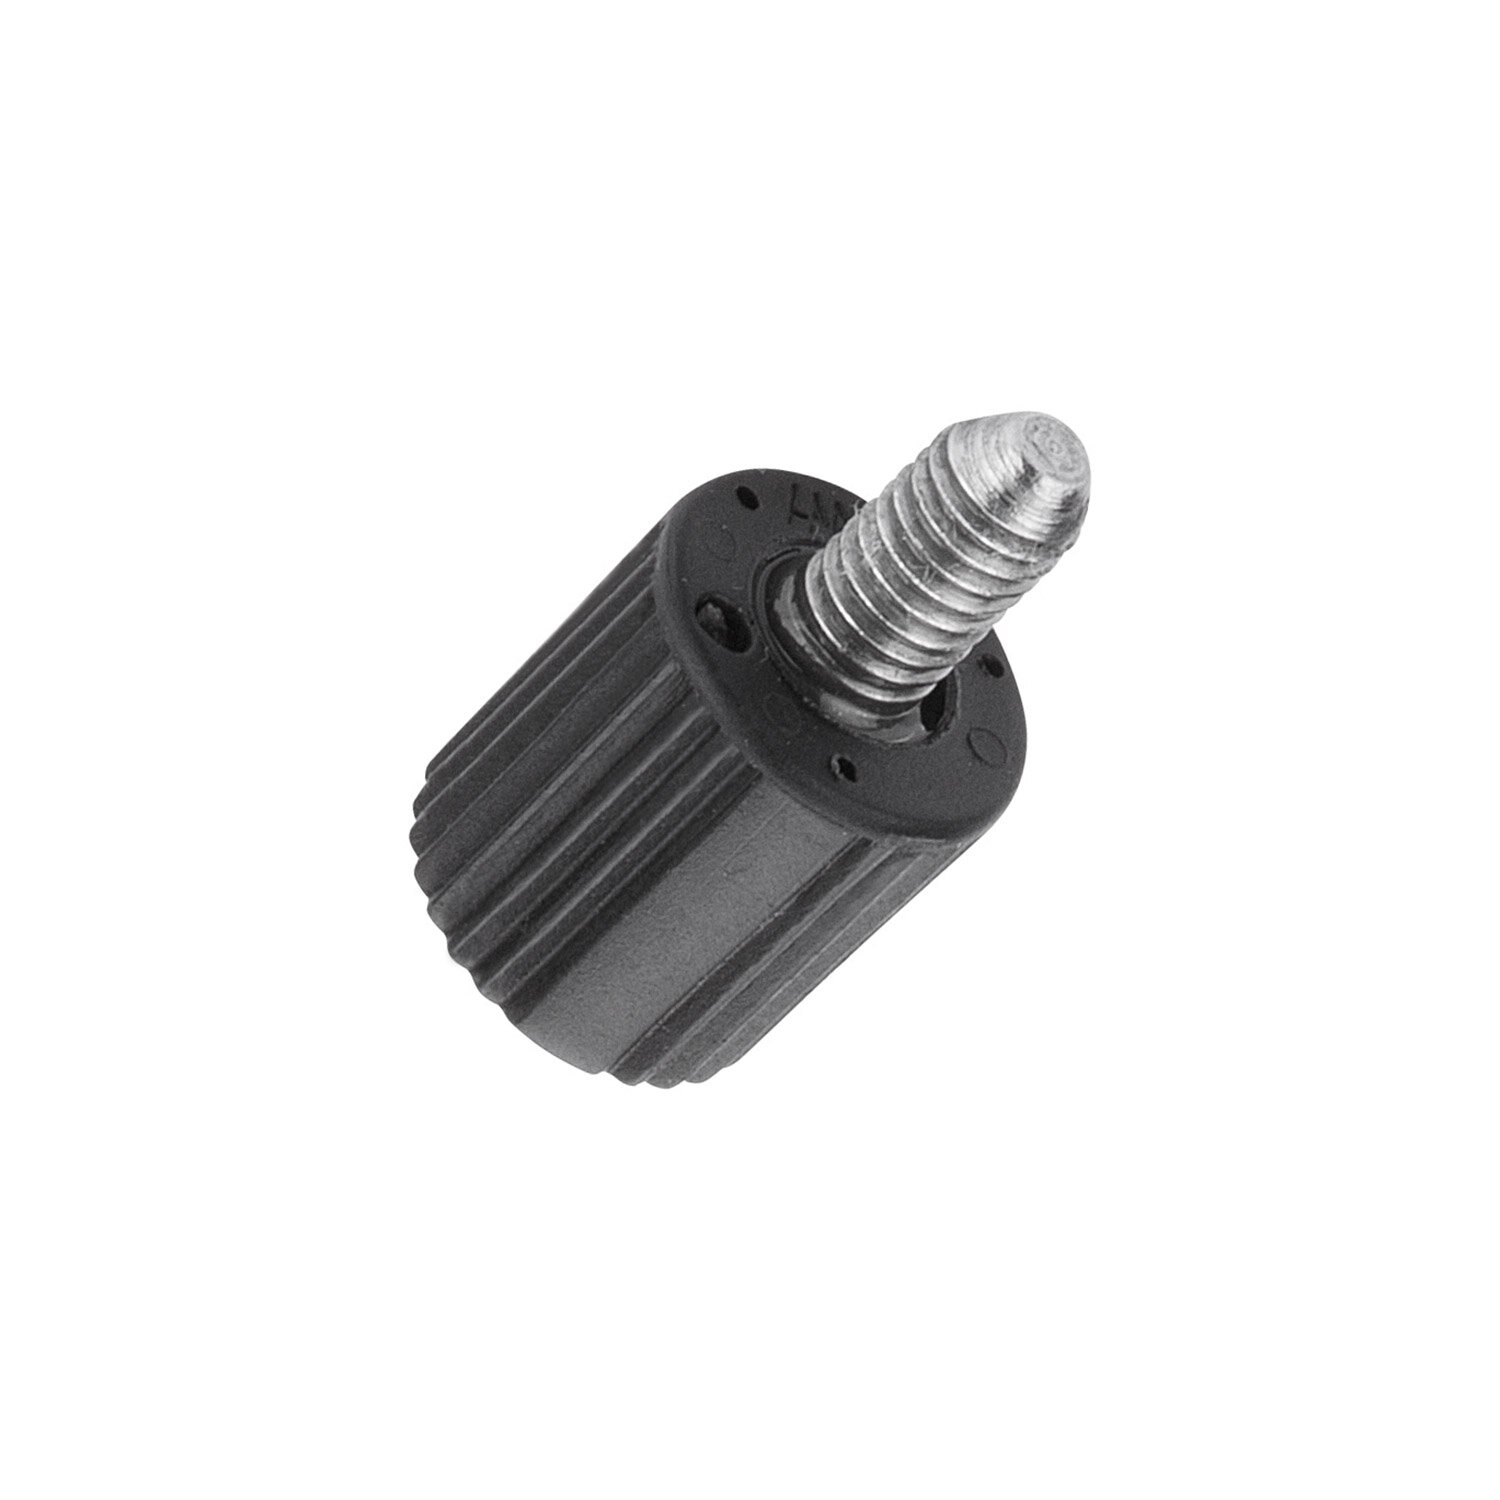 Takeway Quick Release Knob T-RK01 for T1 Clampod [TY105]